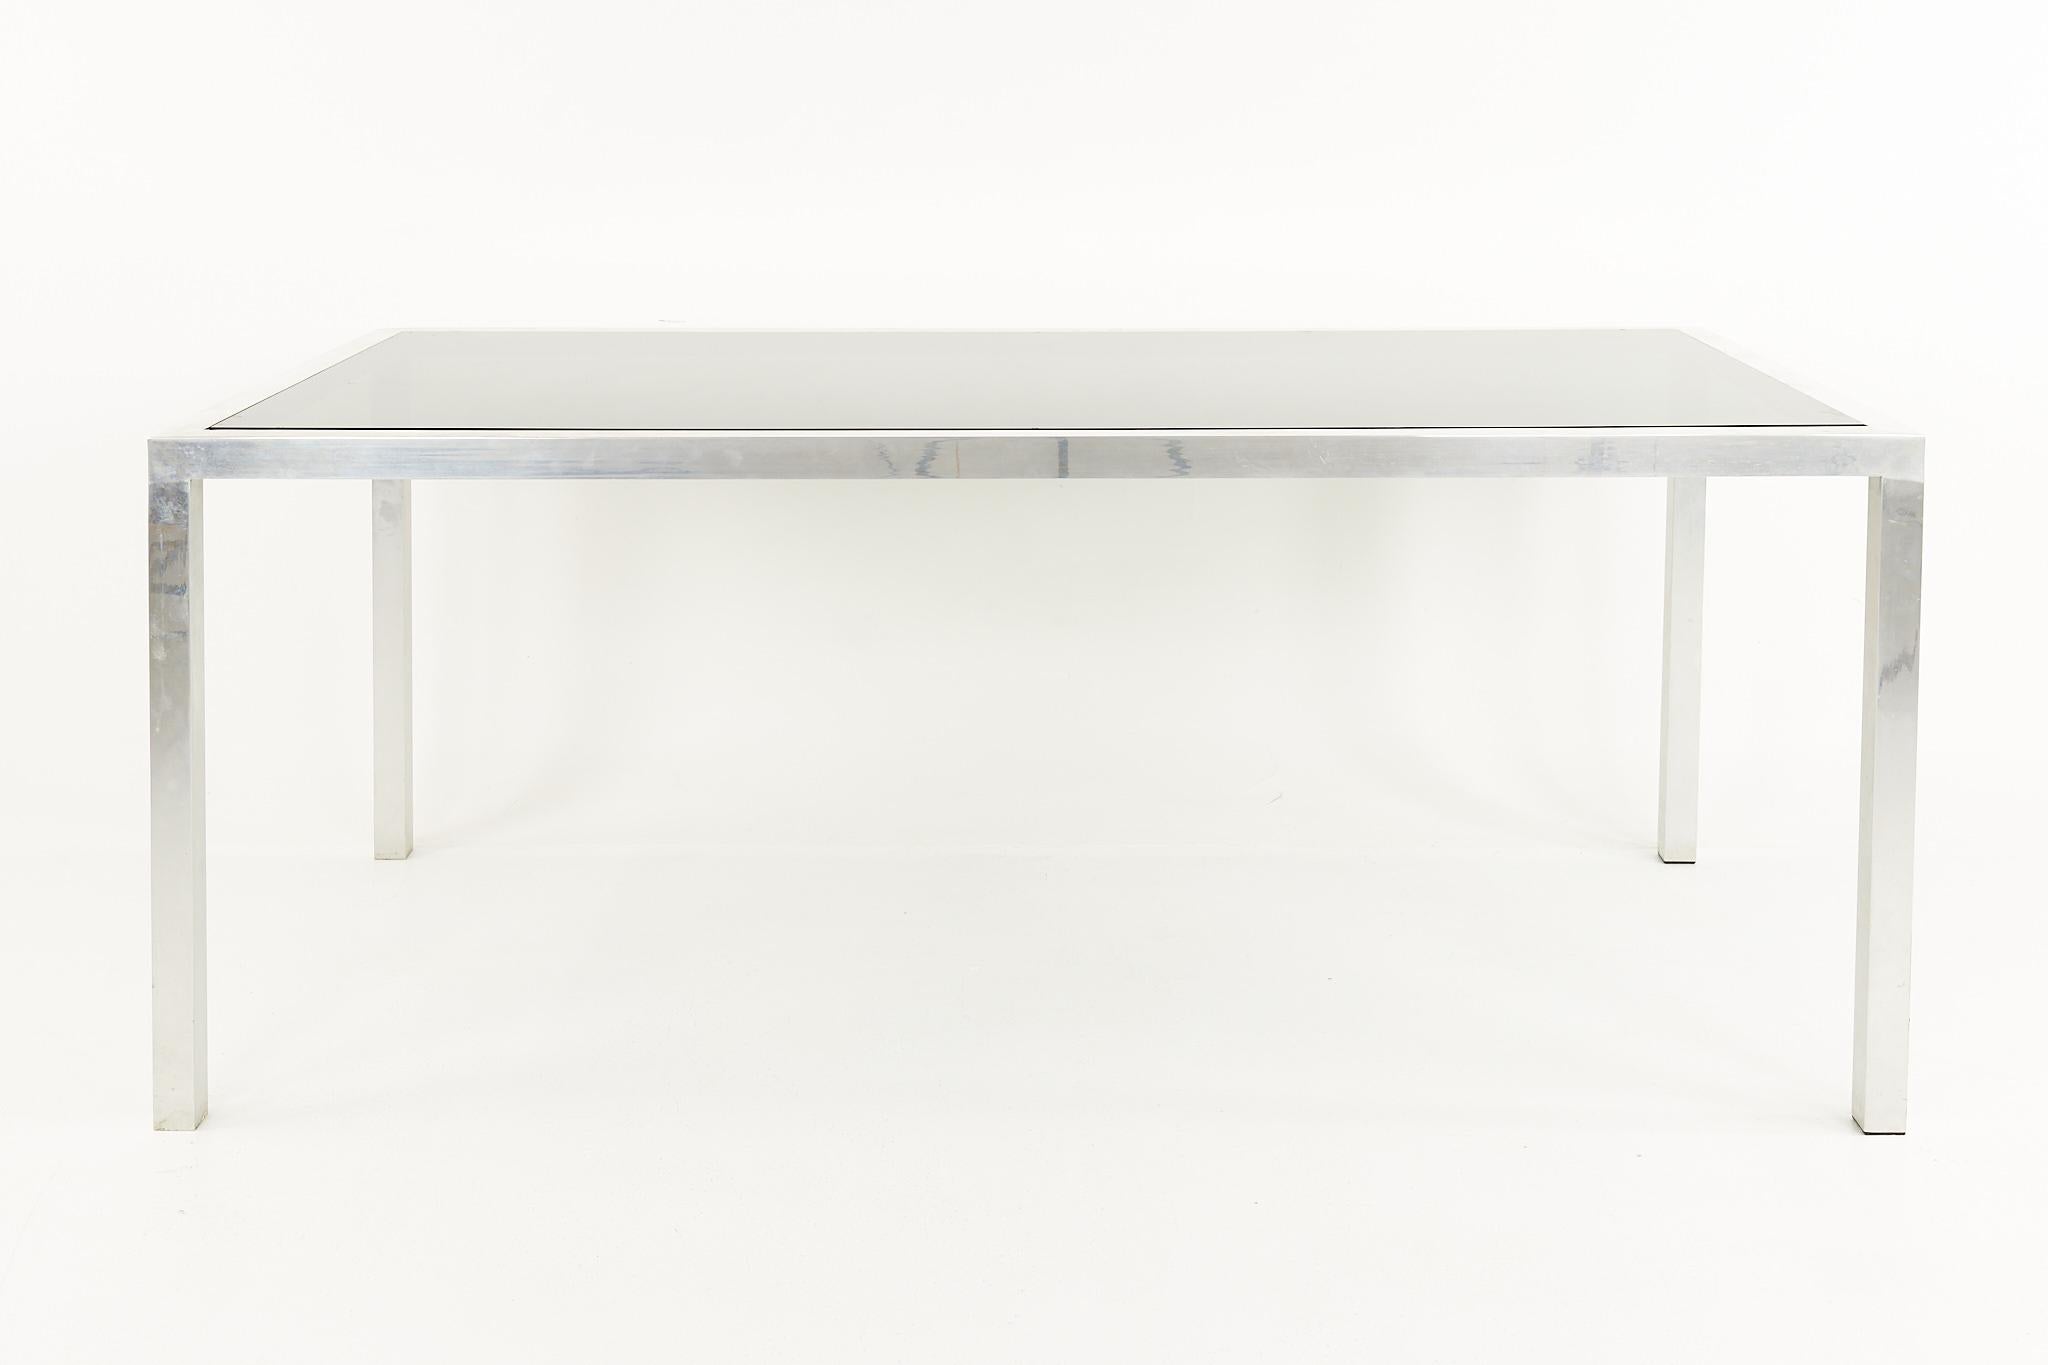 Milo Baughman Style Mid Century Chrome Expanding dining table

The table measures: 72 wide x 36 deep x 29.25 high, with a chair clearance of 27.5 inches high 

All pieces of furniture can be had in what we call restored vintage condition. That